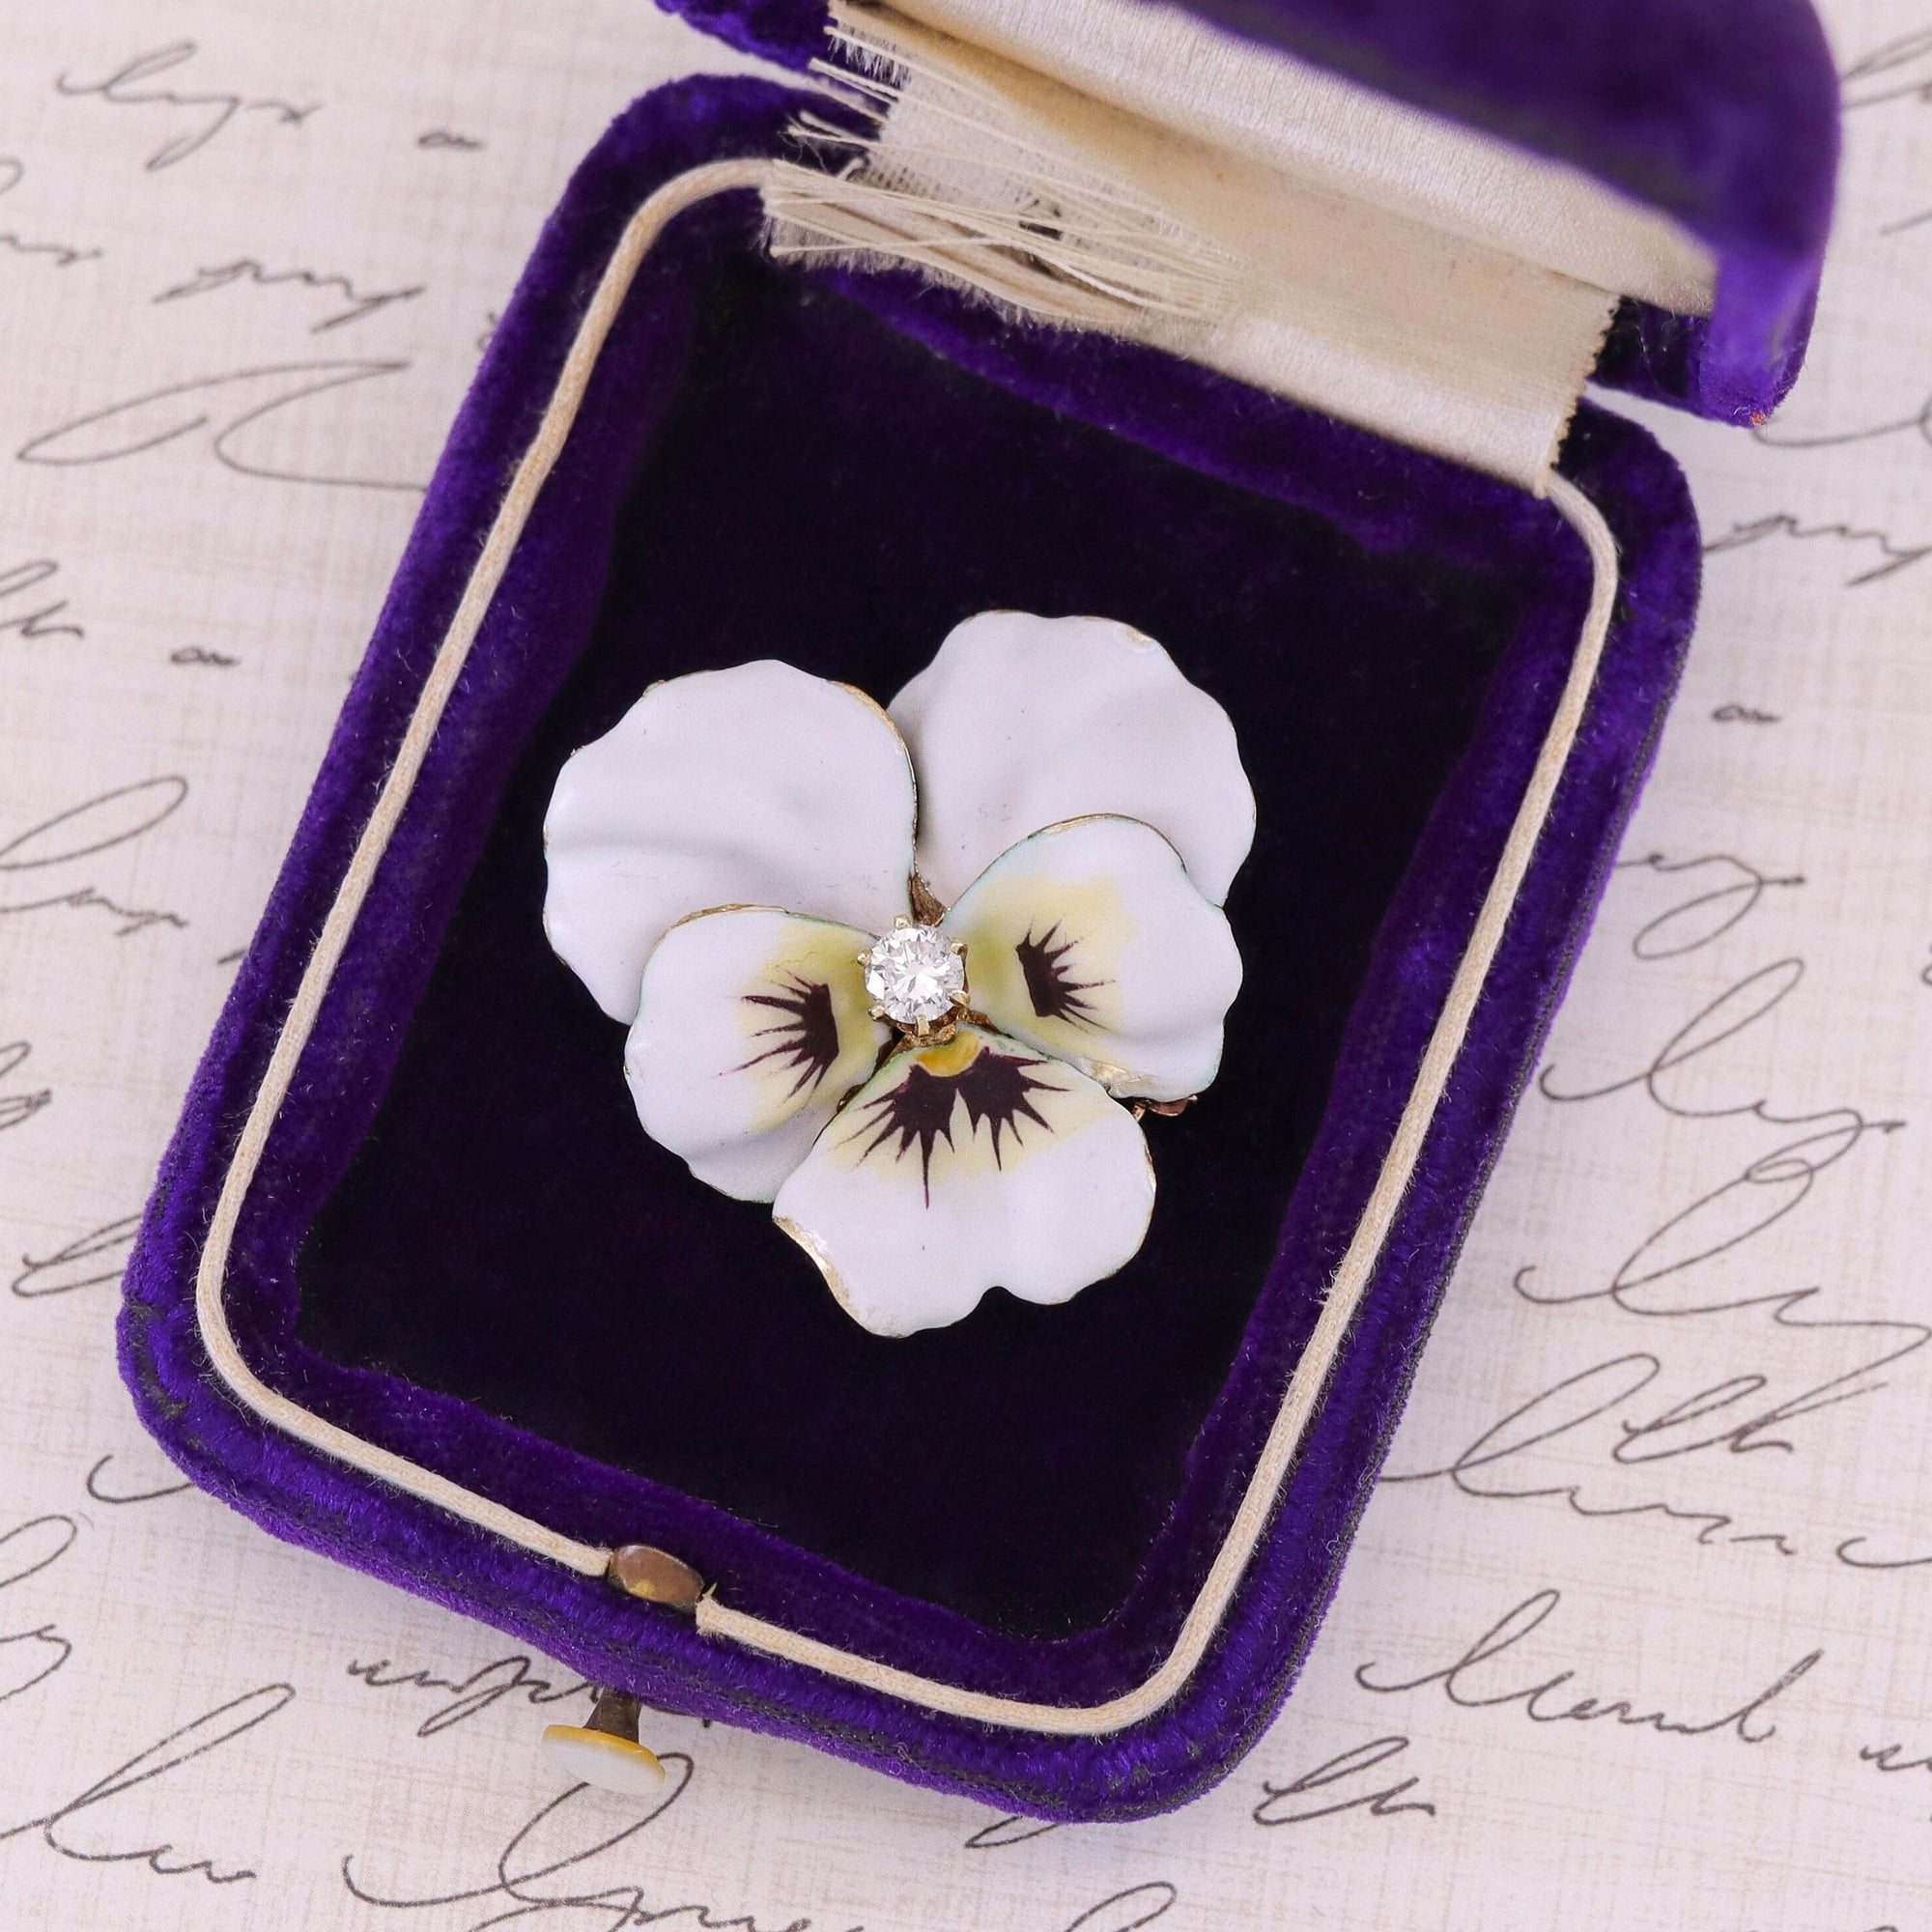 Antique Pansy Brooch of 14k Gold